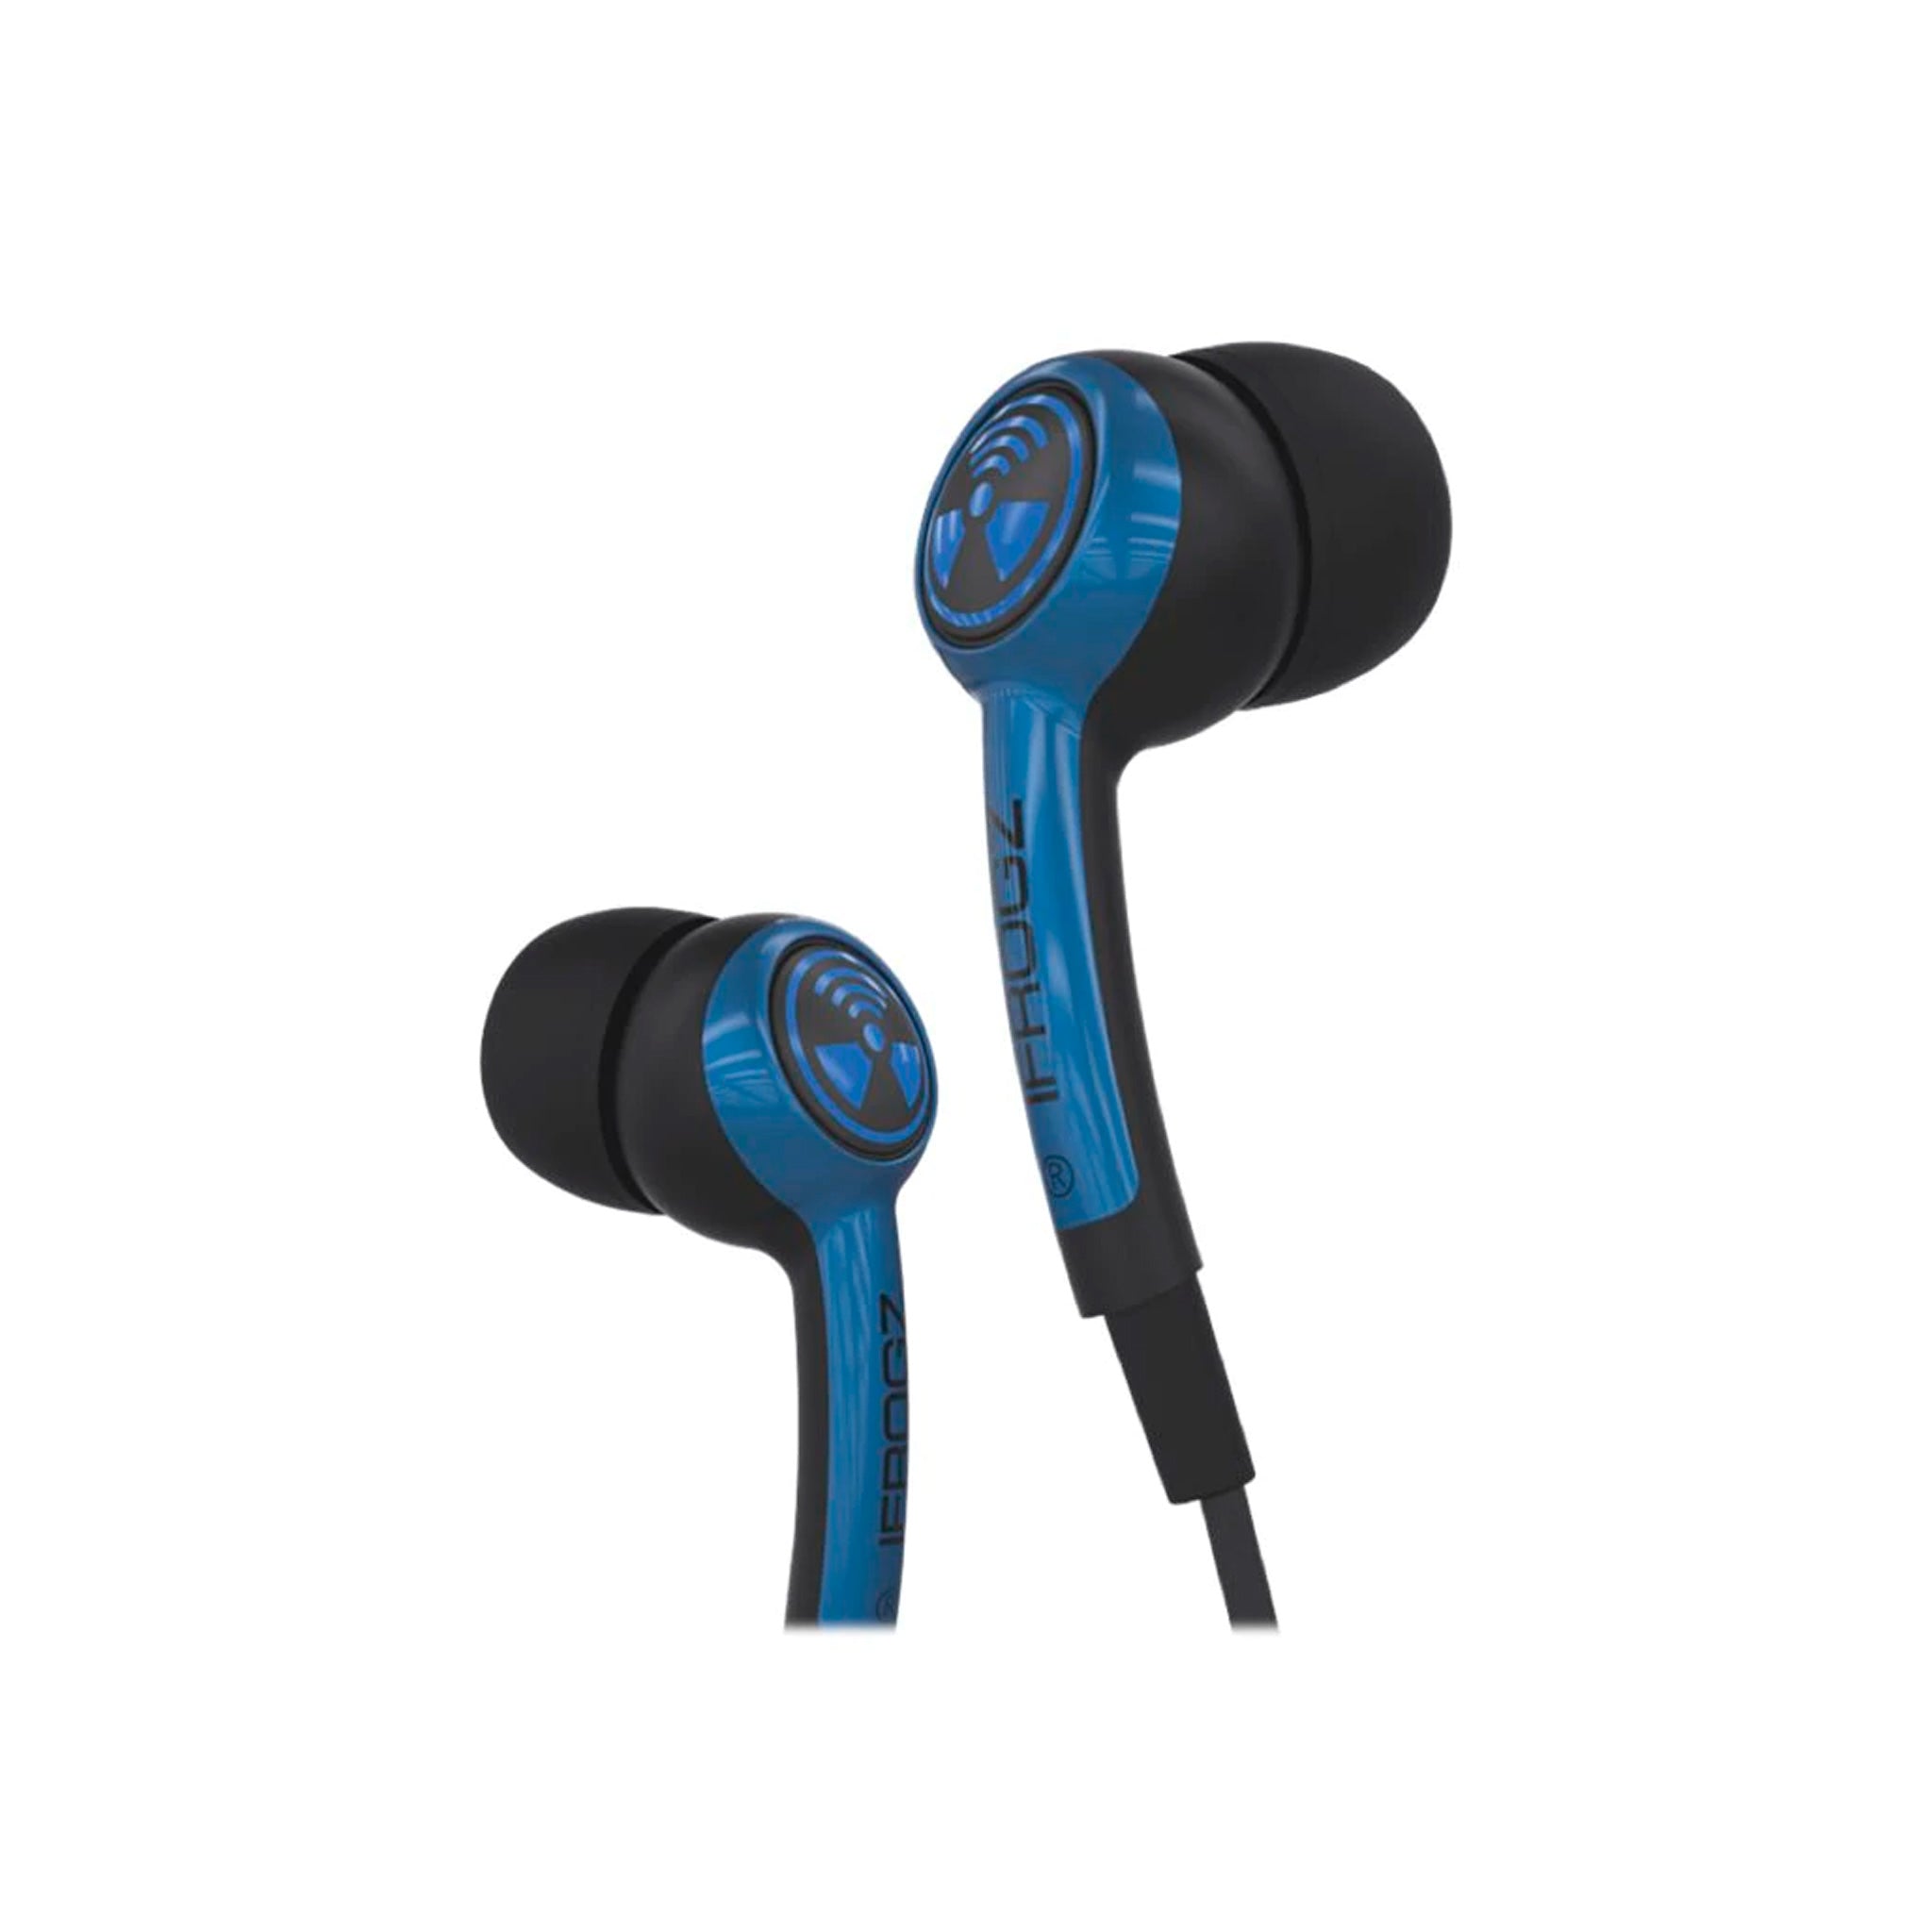 Ifrogz - Plugz In Ear Wired Headphones - Blue